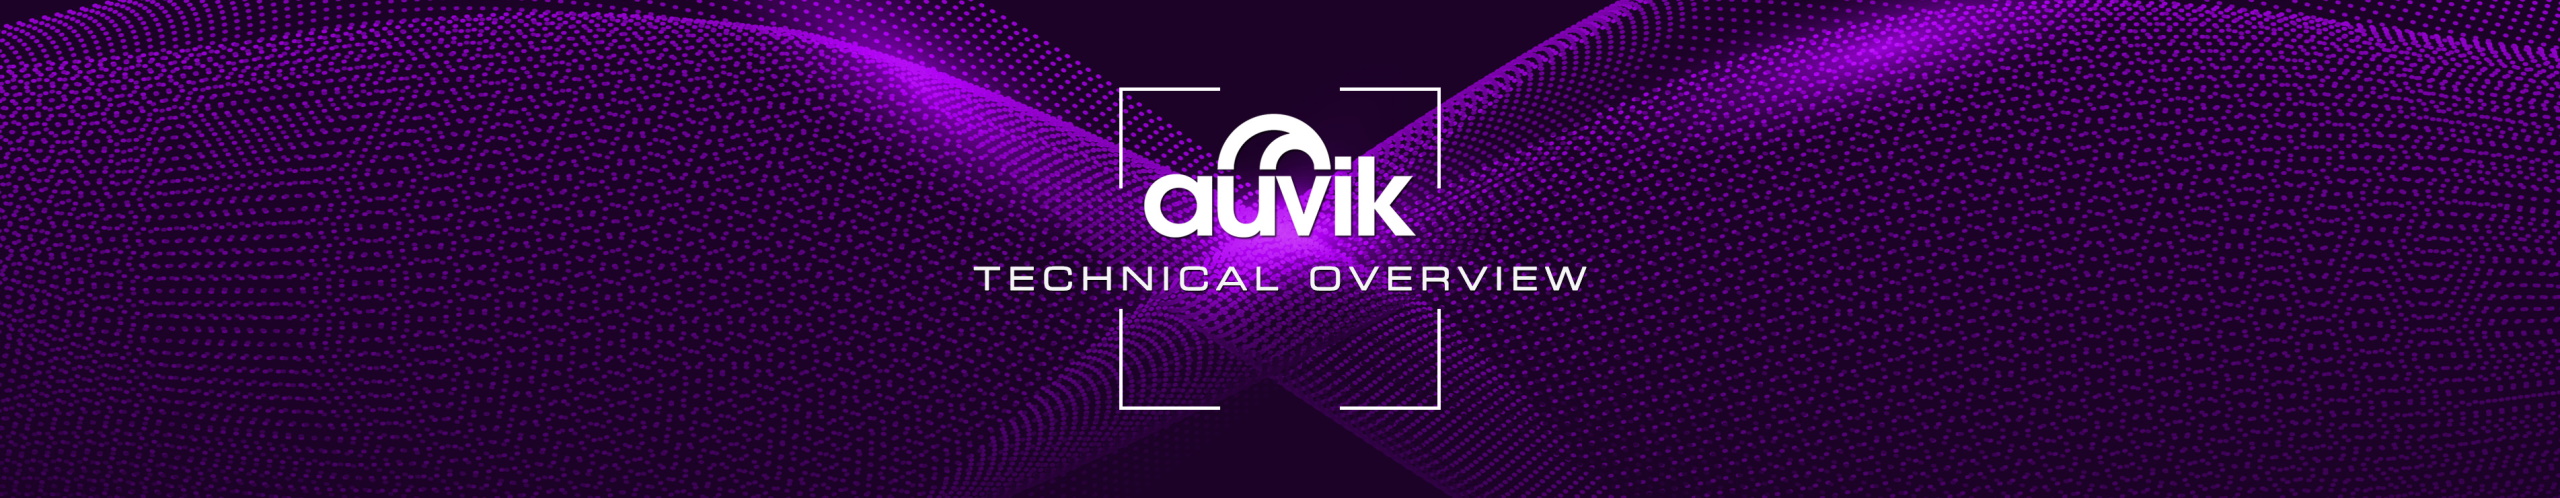 Auvik Technical Overview